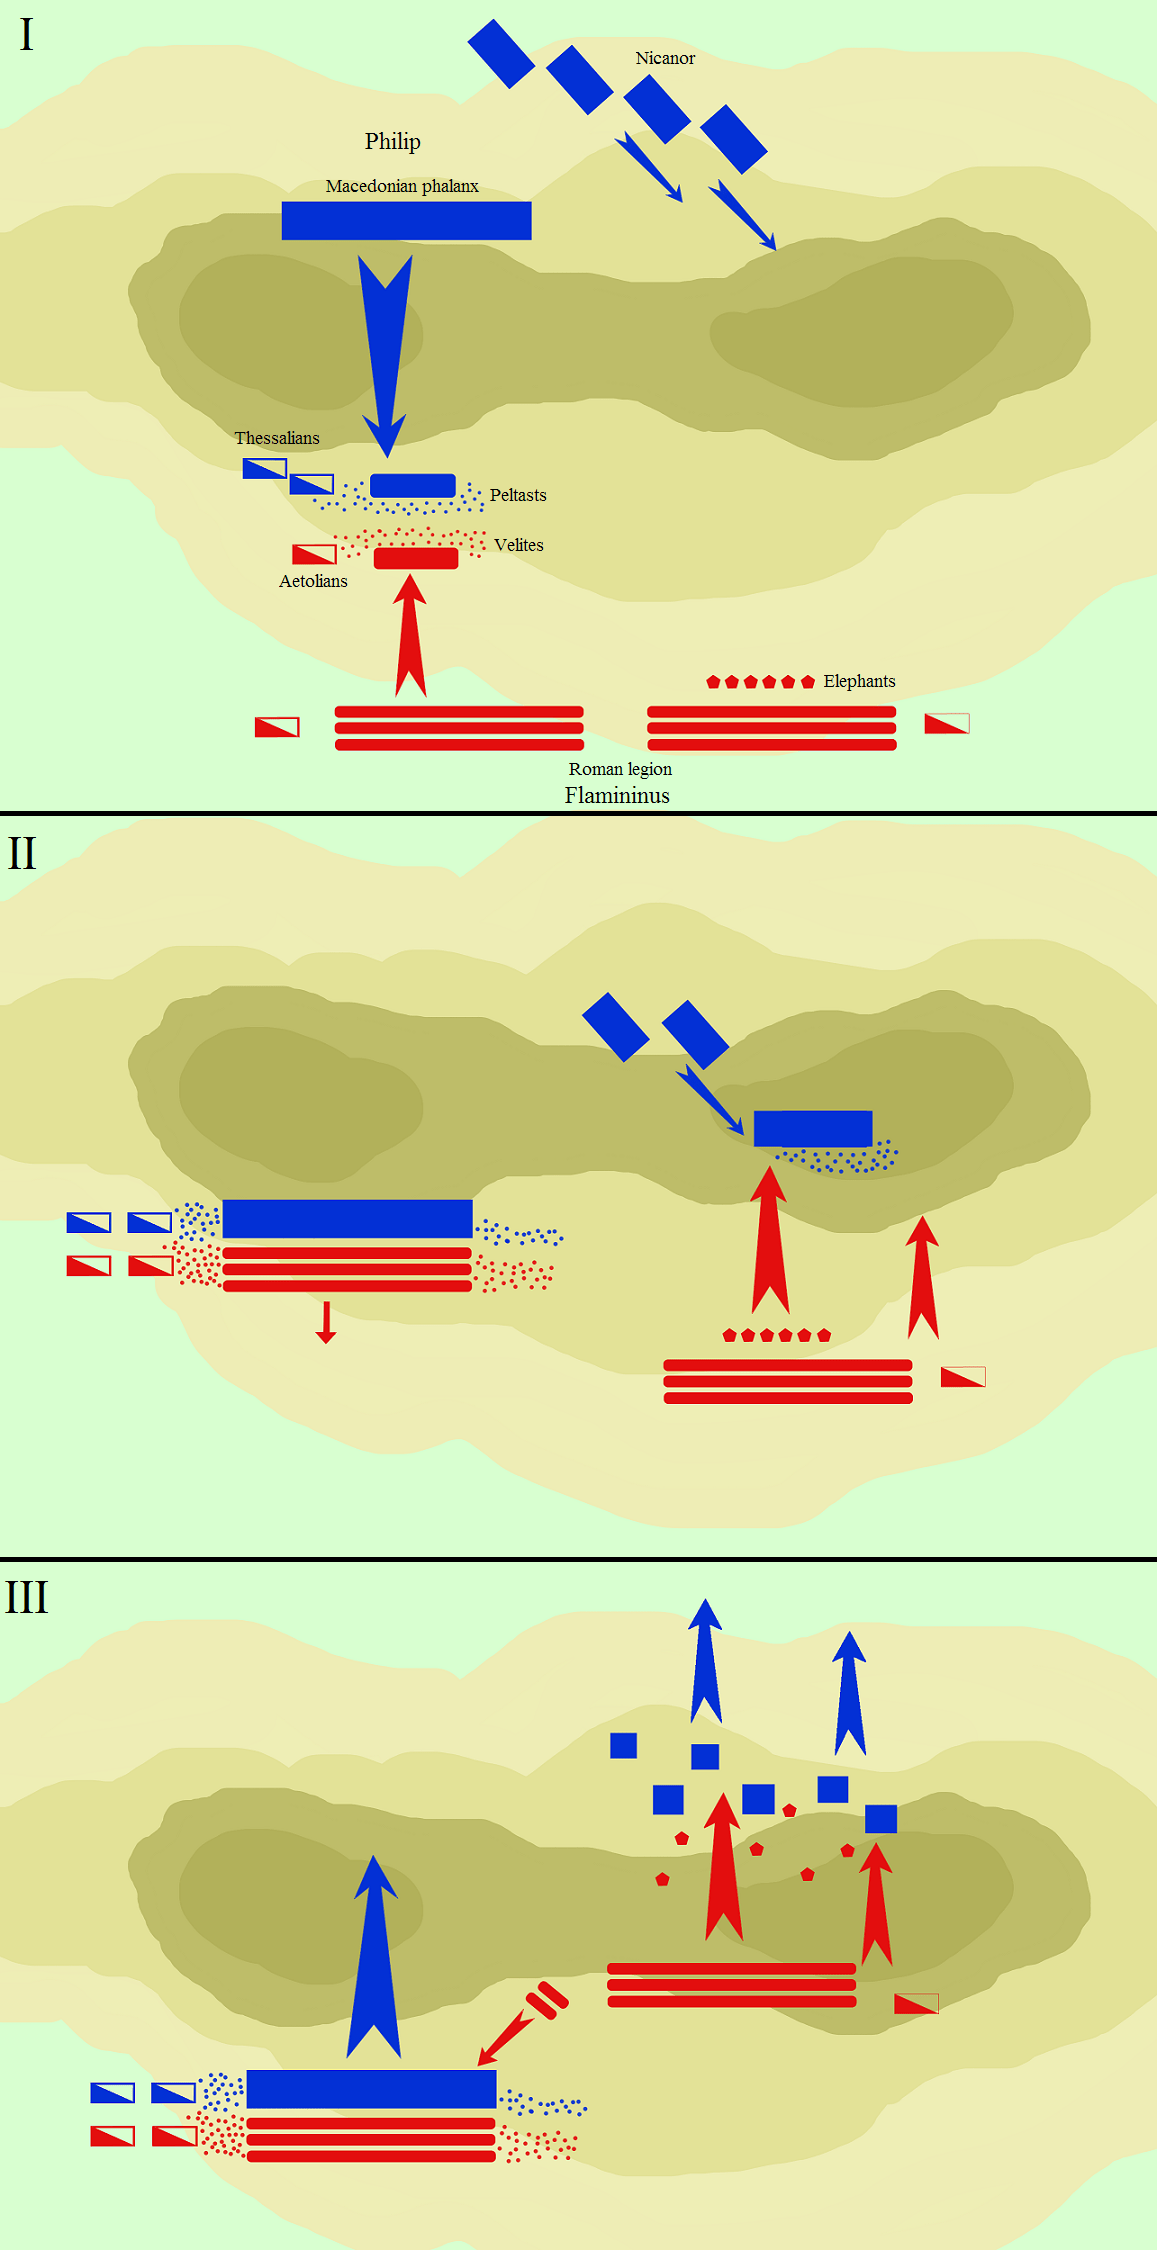 The course of the Battle of Cynoscephalae